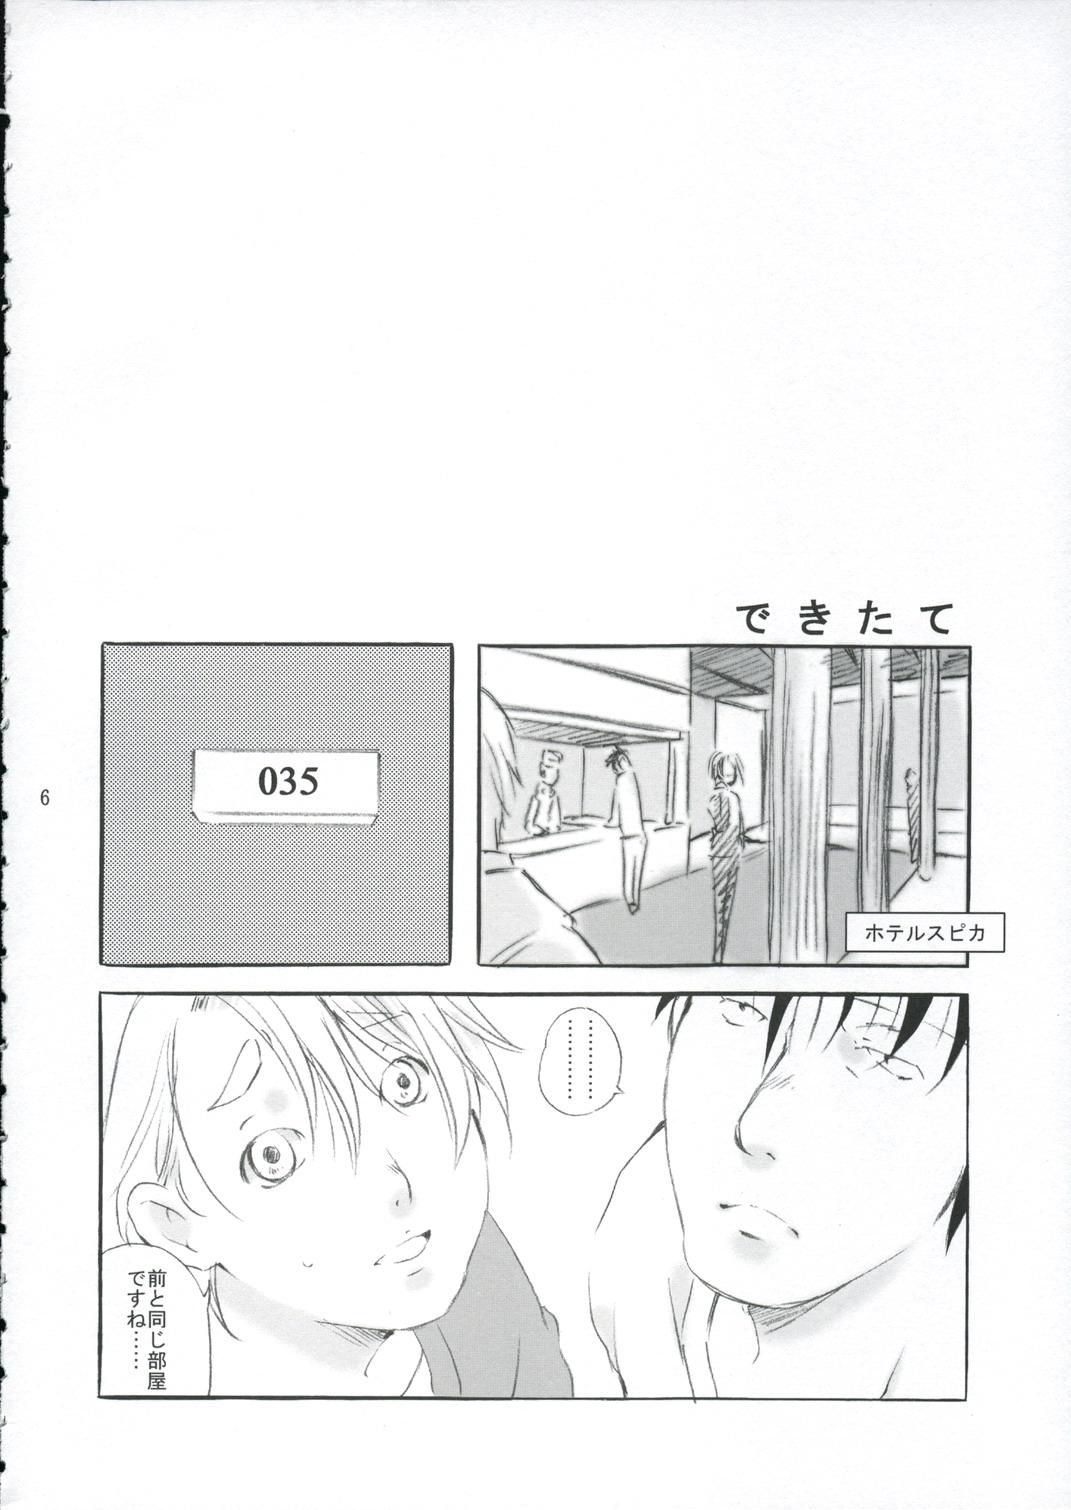 Spy Crescent - Planetes From - Page 5